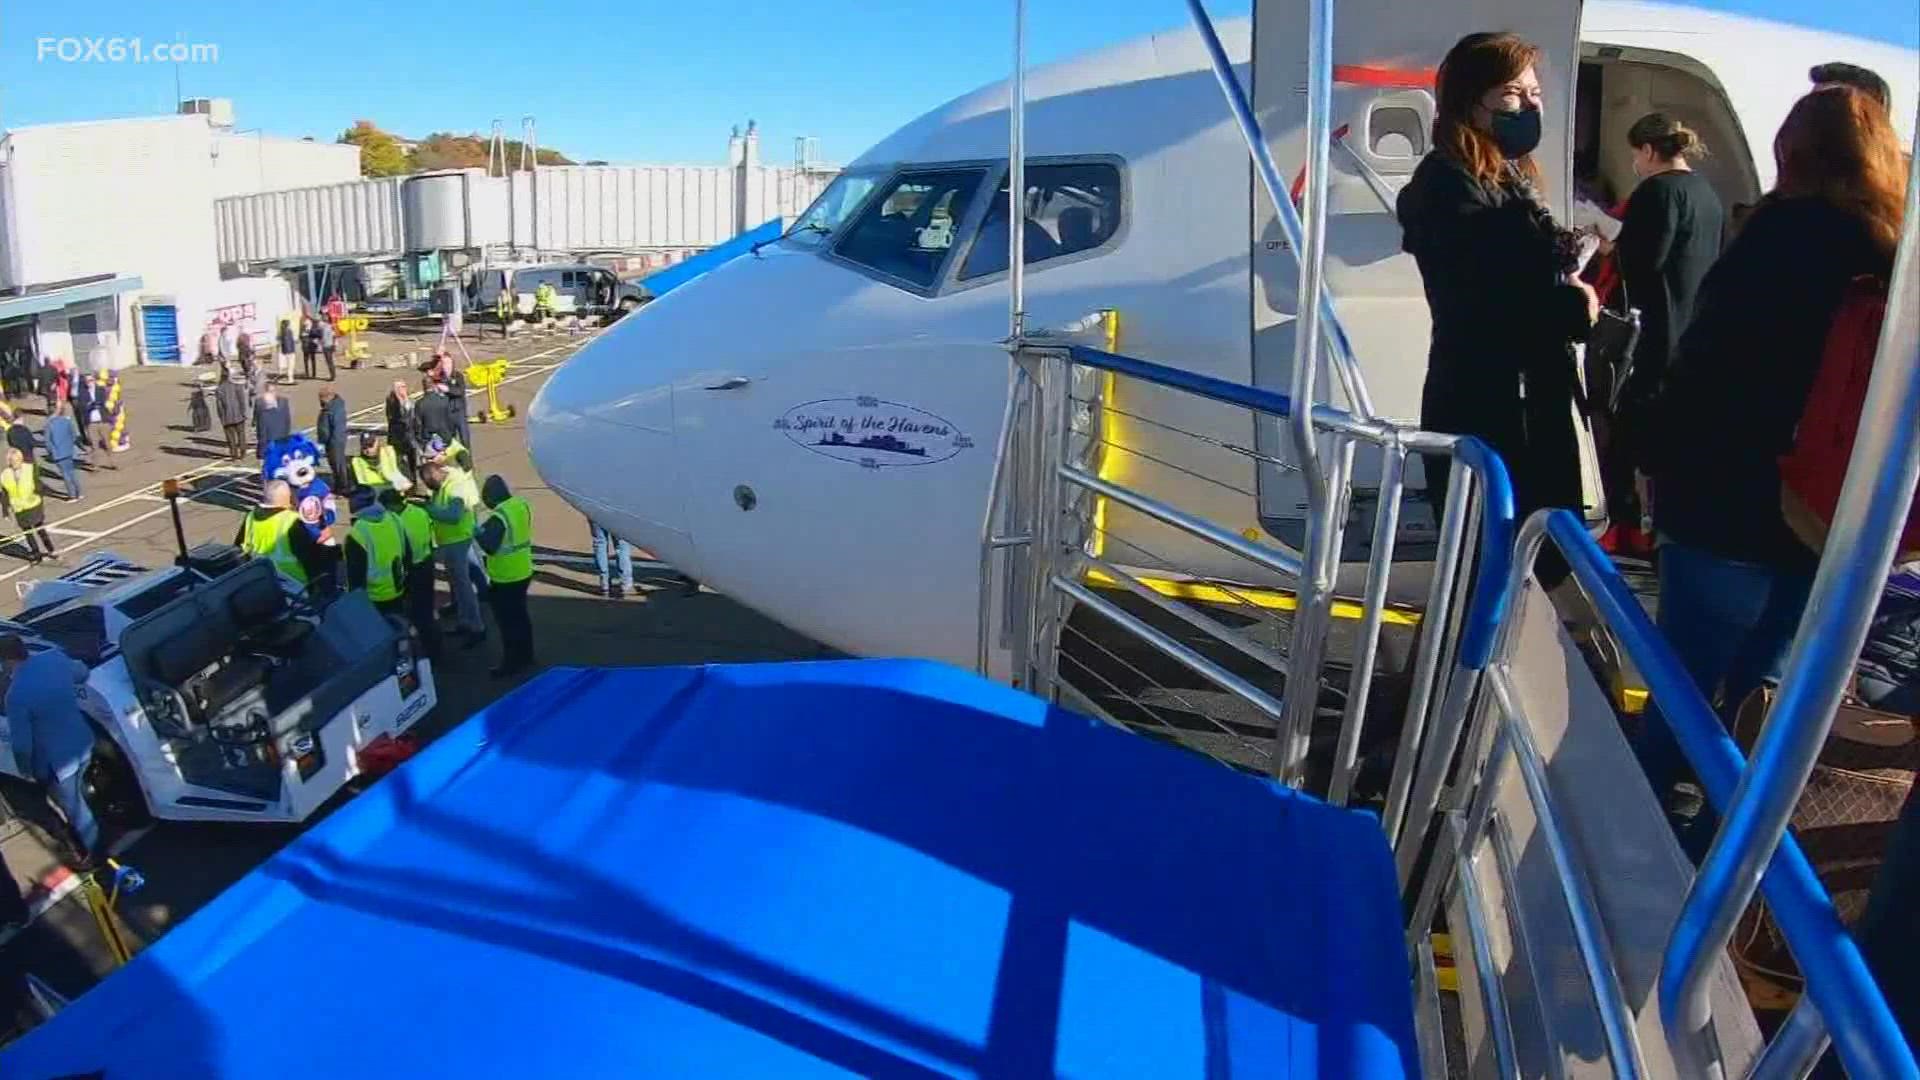 Flights go to several cities in Florida